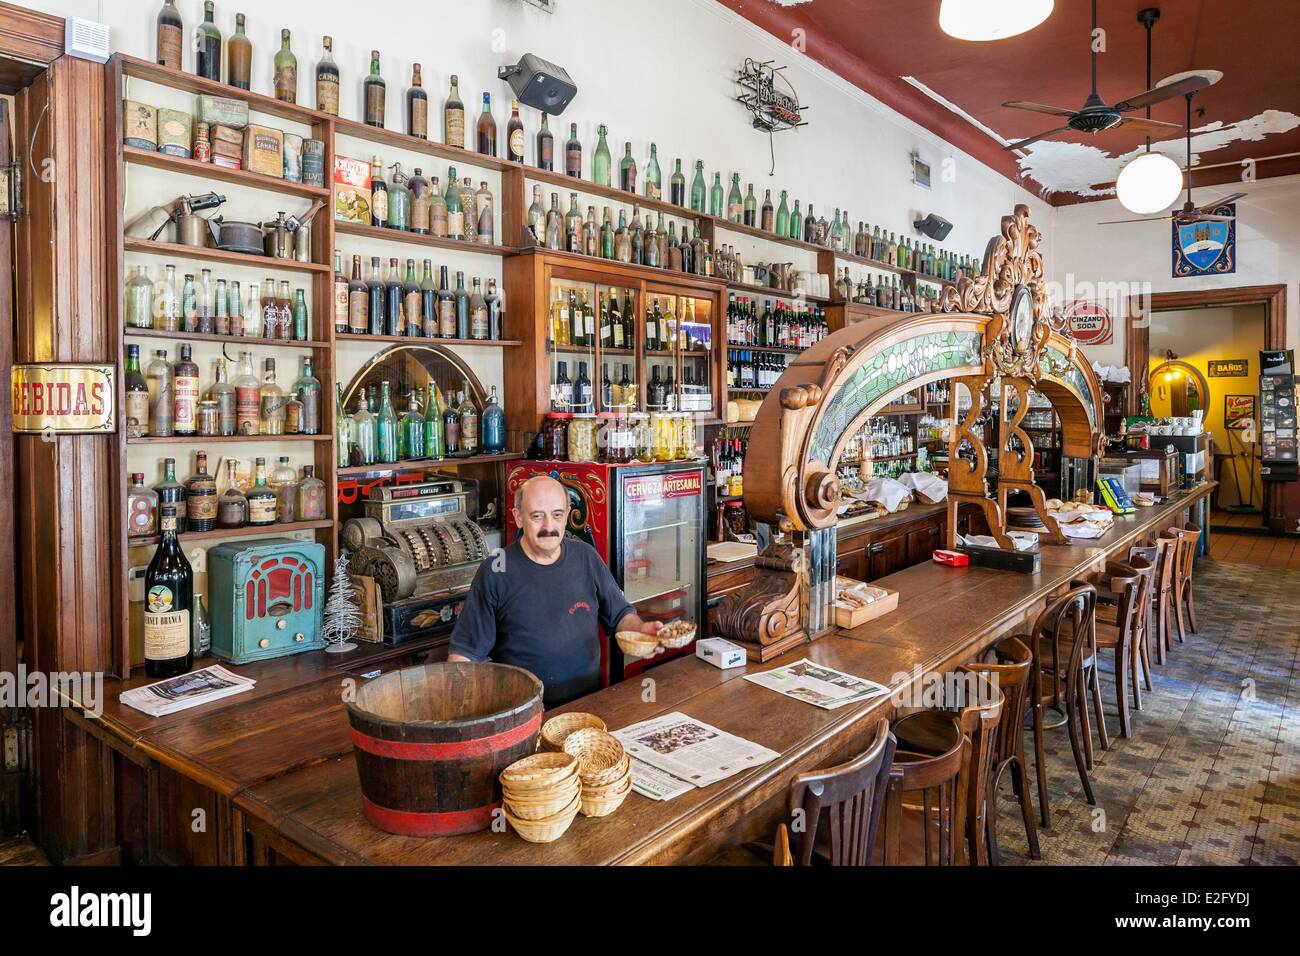 Argentina Buenos Aires San Telmo district El Federal cafe opened in 1864 Stock Photo